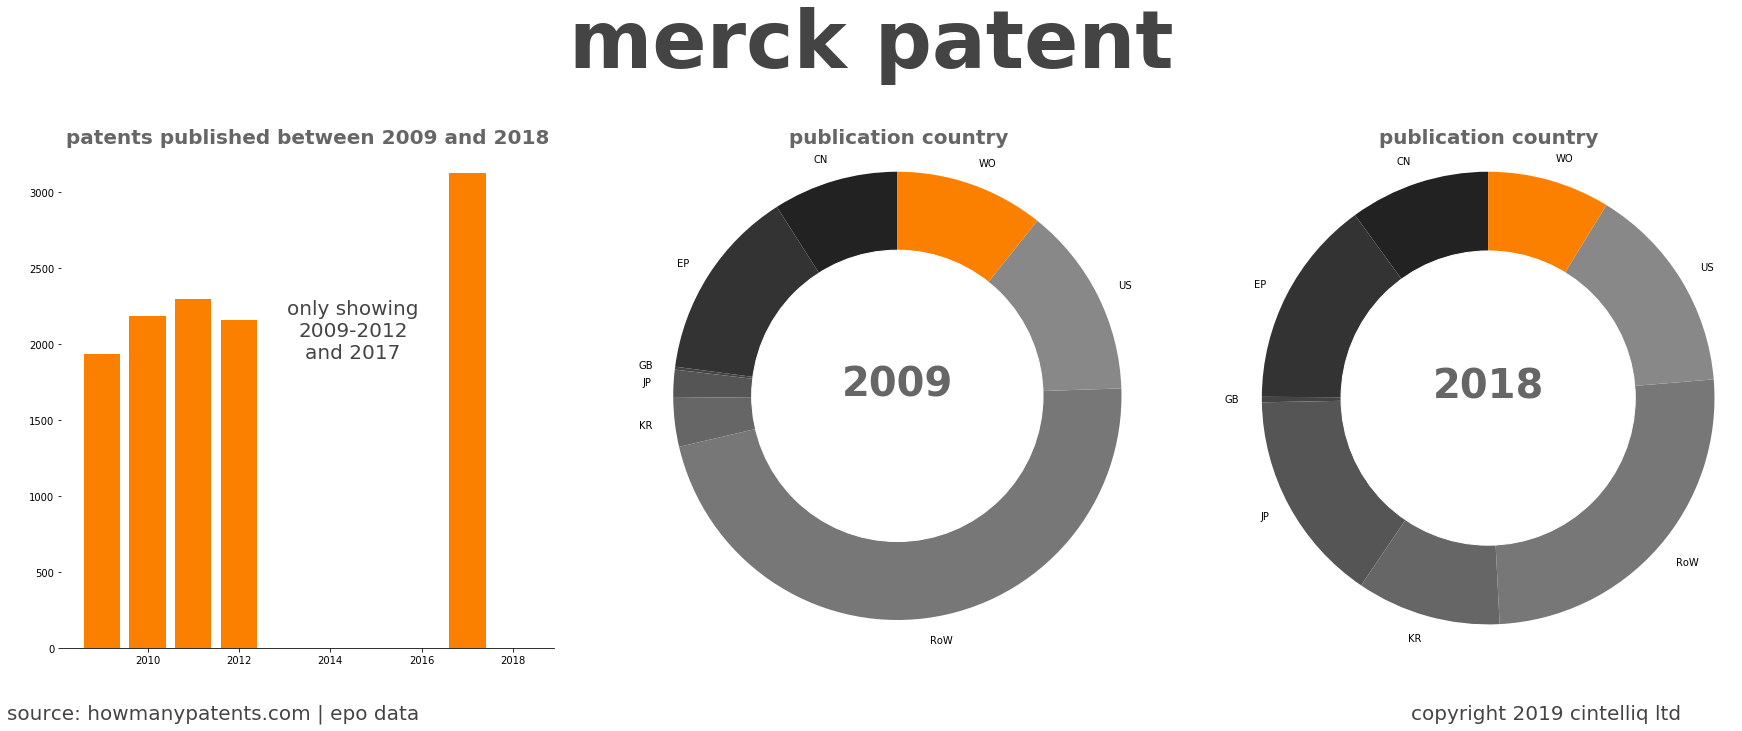 summary of patents for Merck Patent